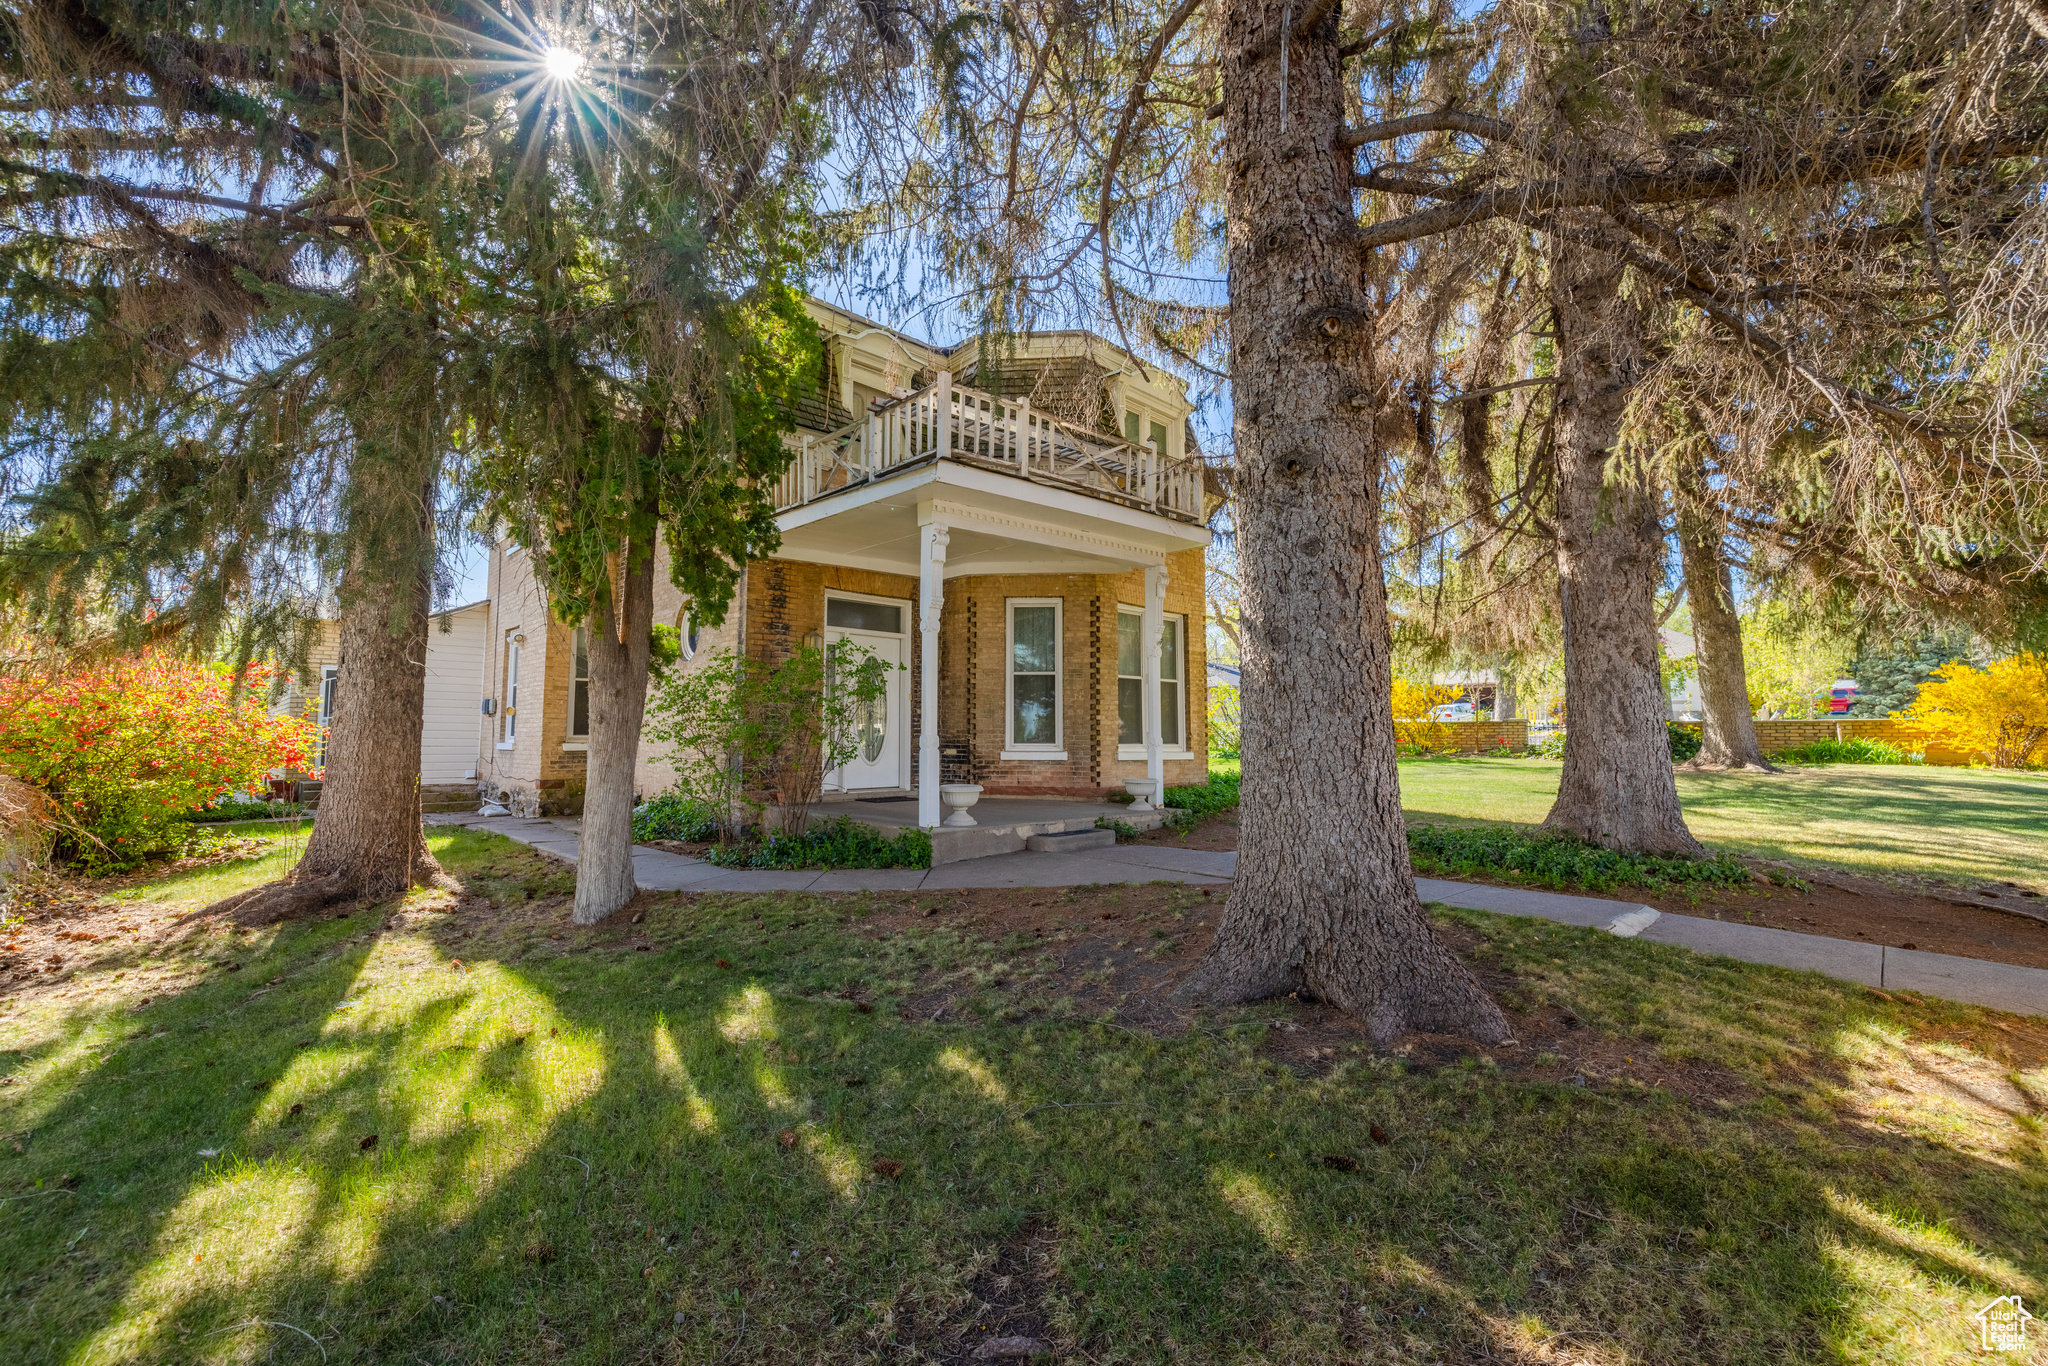 289 S 300 E, Payson, Utah 84651, 4 Bedrooms Bedrooms, 14 Rooms Rooms,1 BathroomBathrooms,Residential,For sale,300,1994911